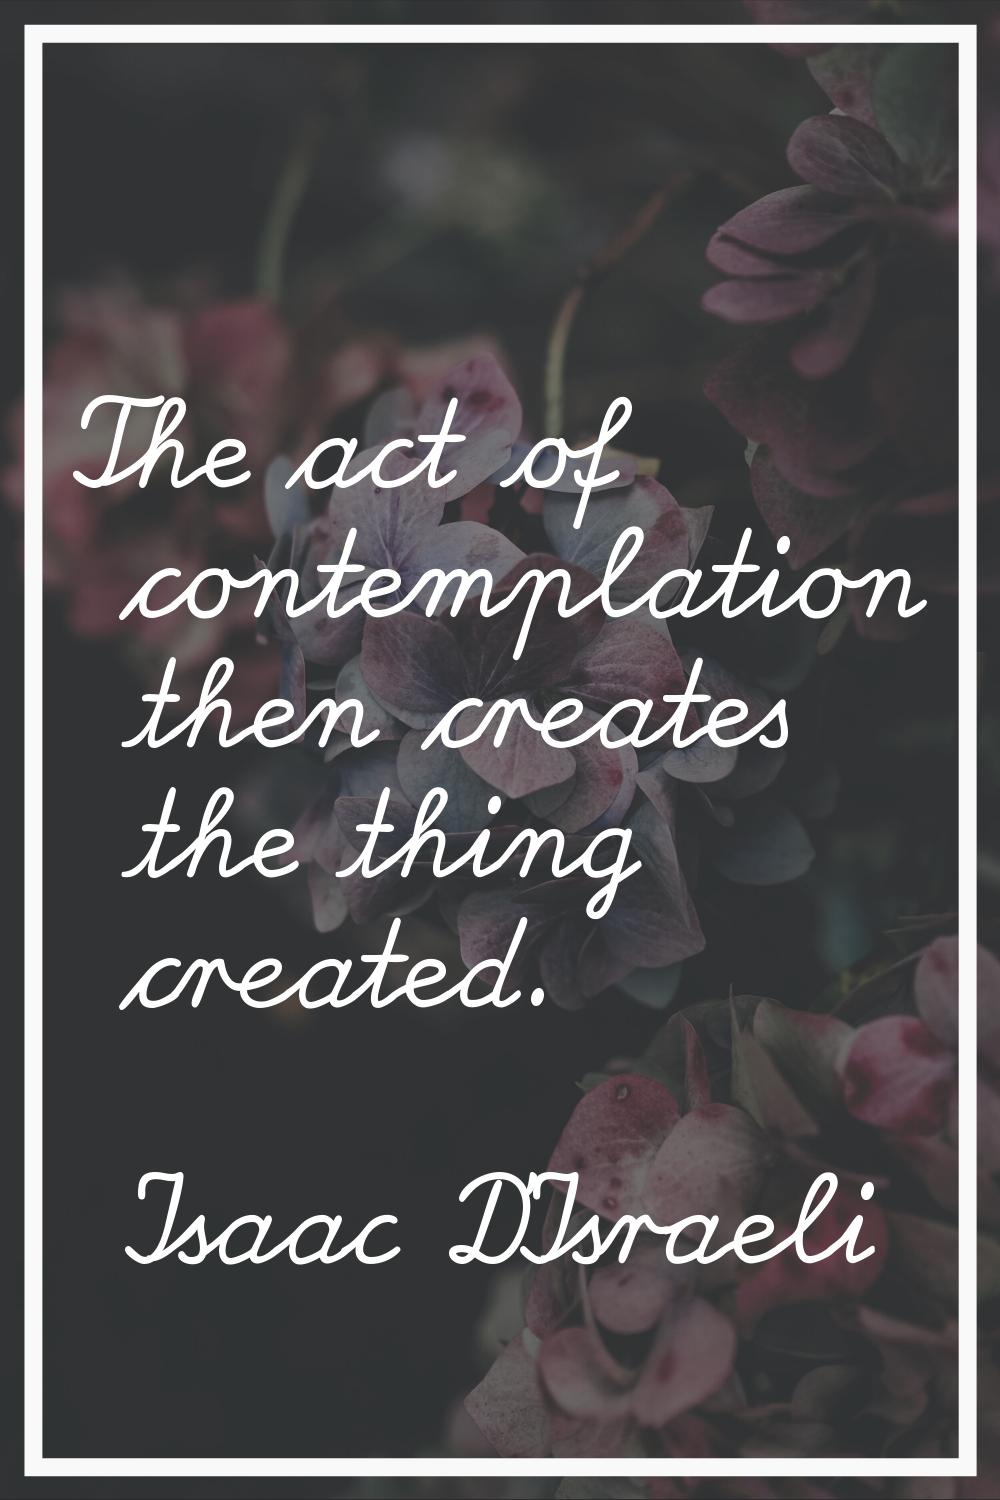 The act of contemplation then creates the thing created.